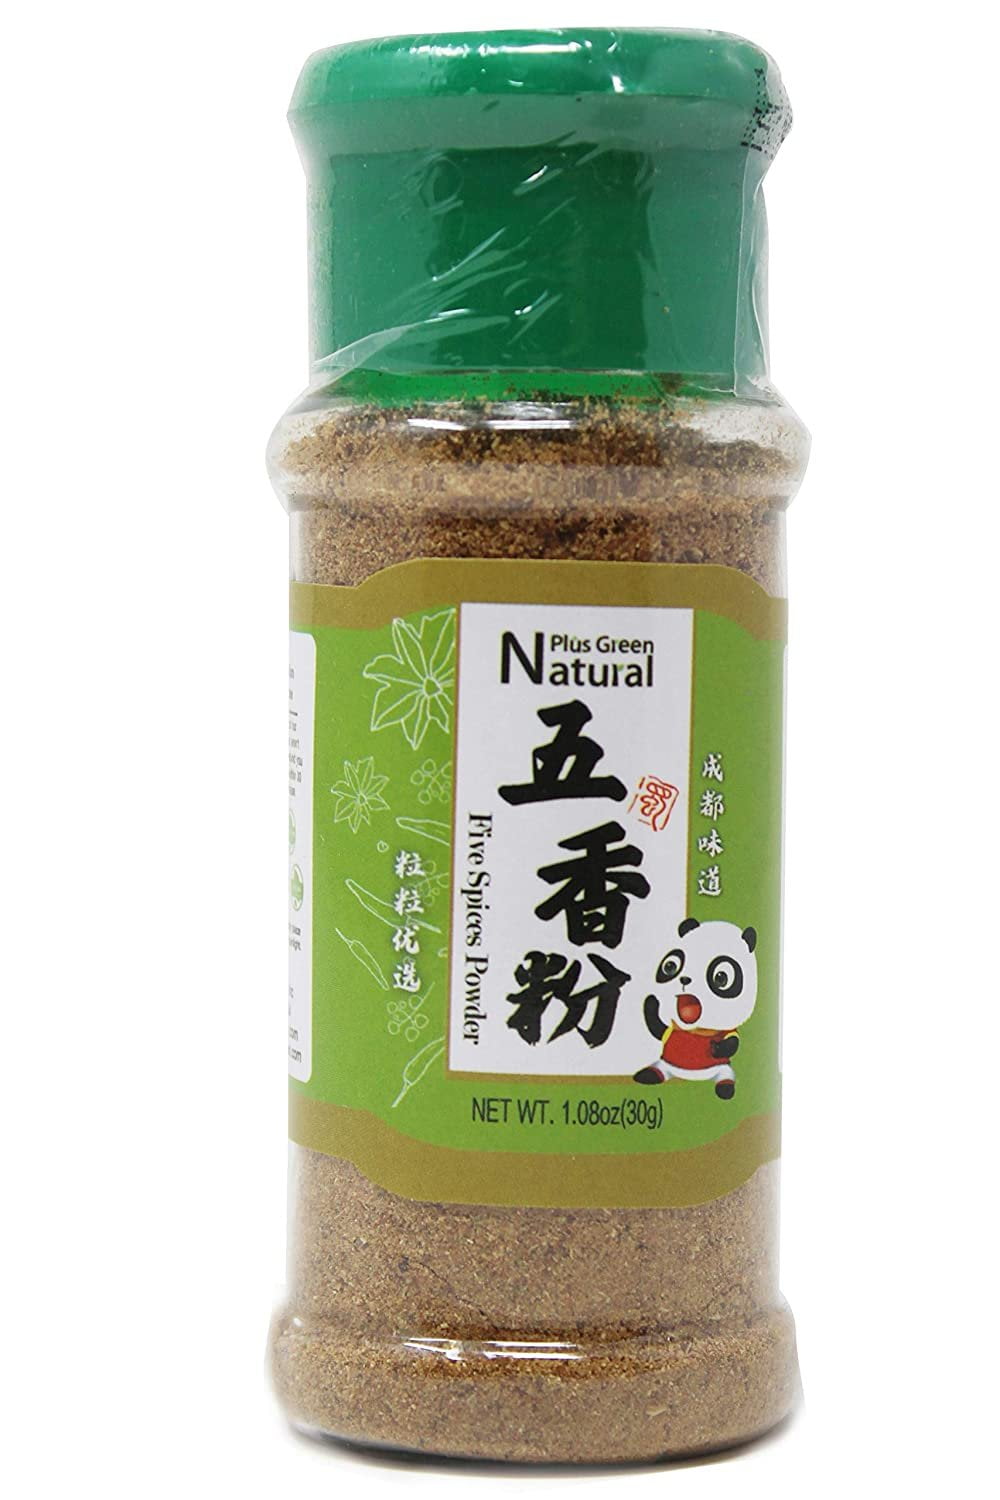 What Is Chinese Five Spice?